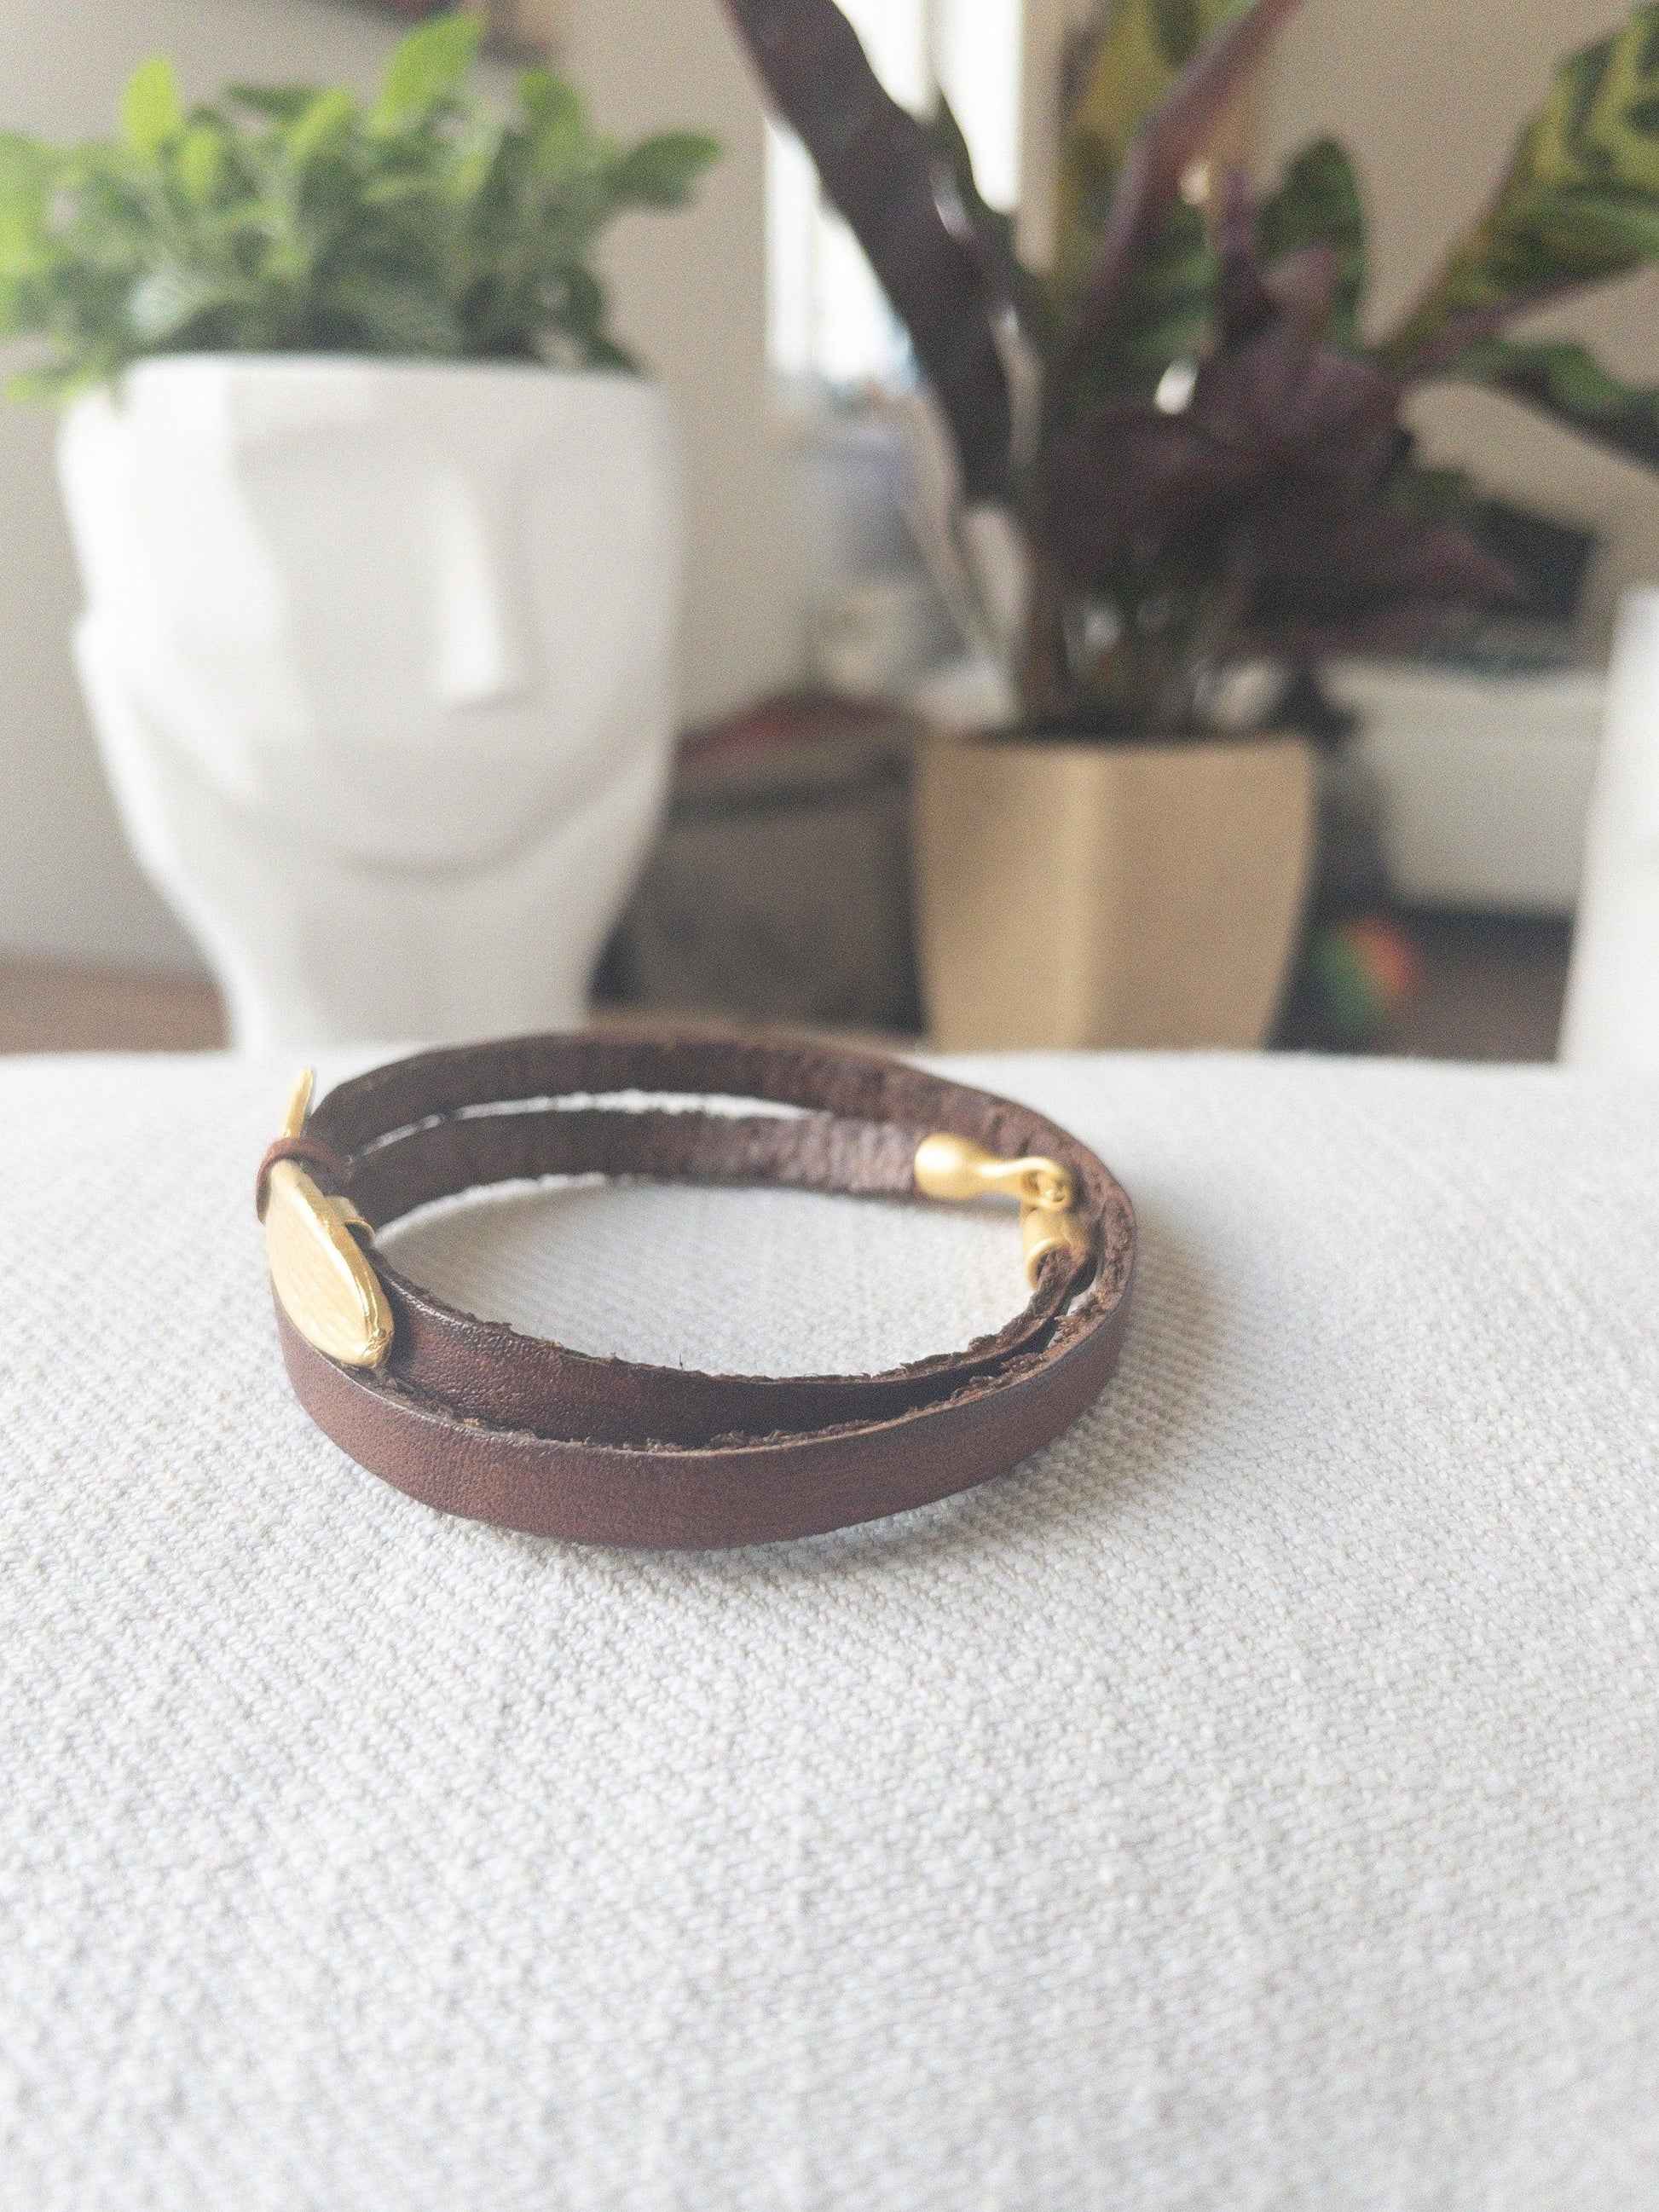 Leather Wrap Bracelet with a gold plated Fish - BeachPerfect.de